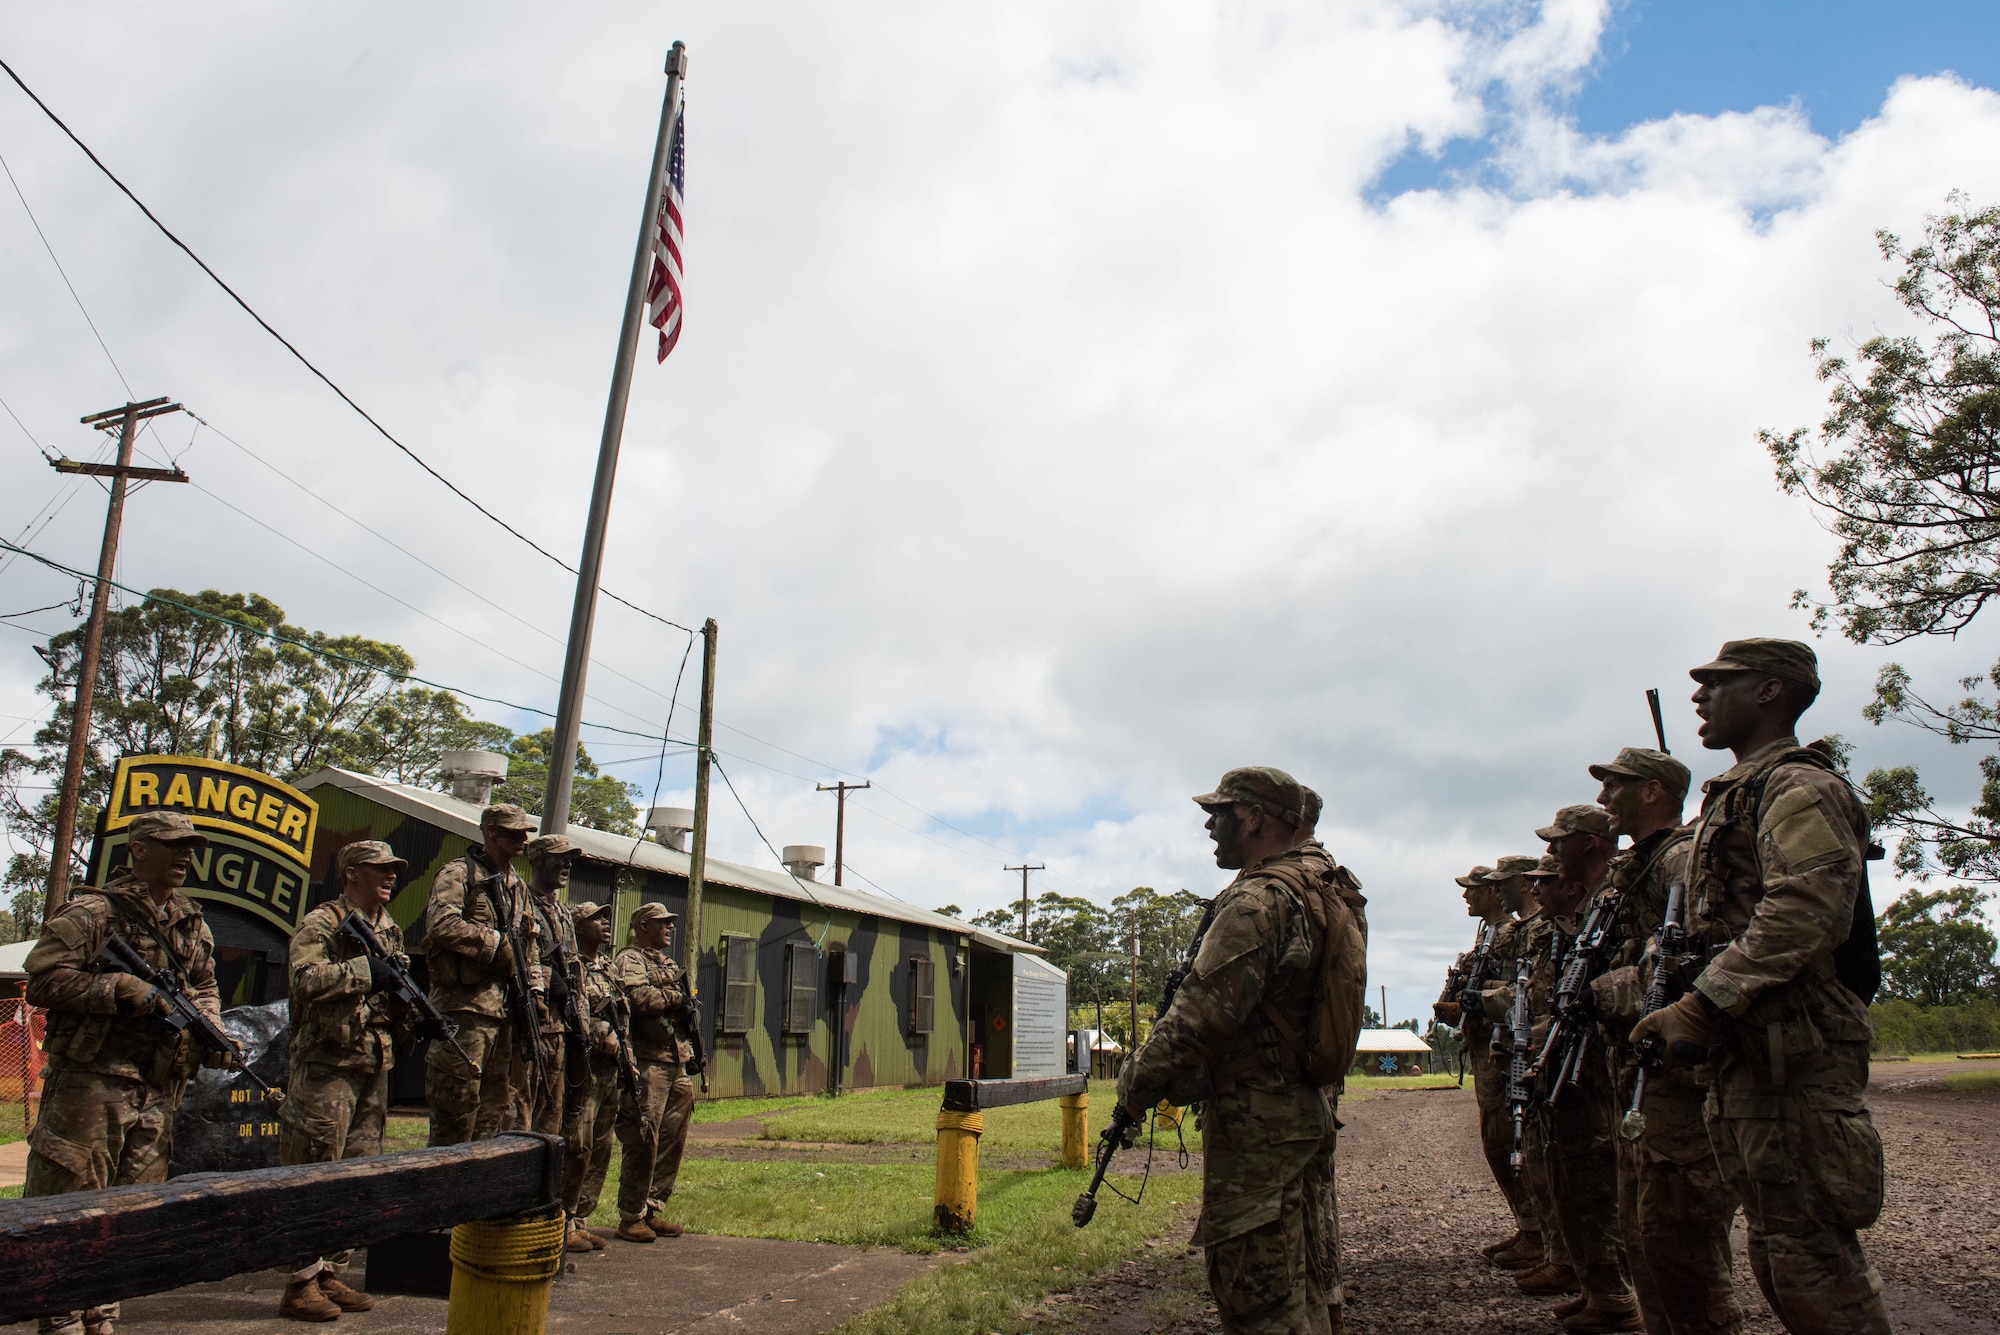 Airmen recite the Ranger Creed during their time going through the Ranger Assessment Course near Schofield Barracks, Oahu, Hawaii, May 18, 2019. The Airmen who pass the RAC gain more than a ticket into Ranger School and knowledge on Army tactics – they learn to lead. Throughout the course, Airmen were tested on their ability to perform land navigation, ambush, react to contact and squad attacks. Along with those assessments, the students went on runs and marches of different distances – all leading up to a 12-mile ruck march two days before graduation. (U.S. Air Force photo by Staff Sgt. Hailey Haux)